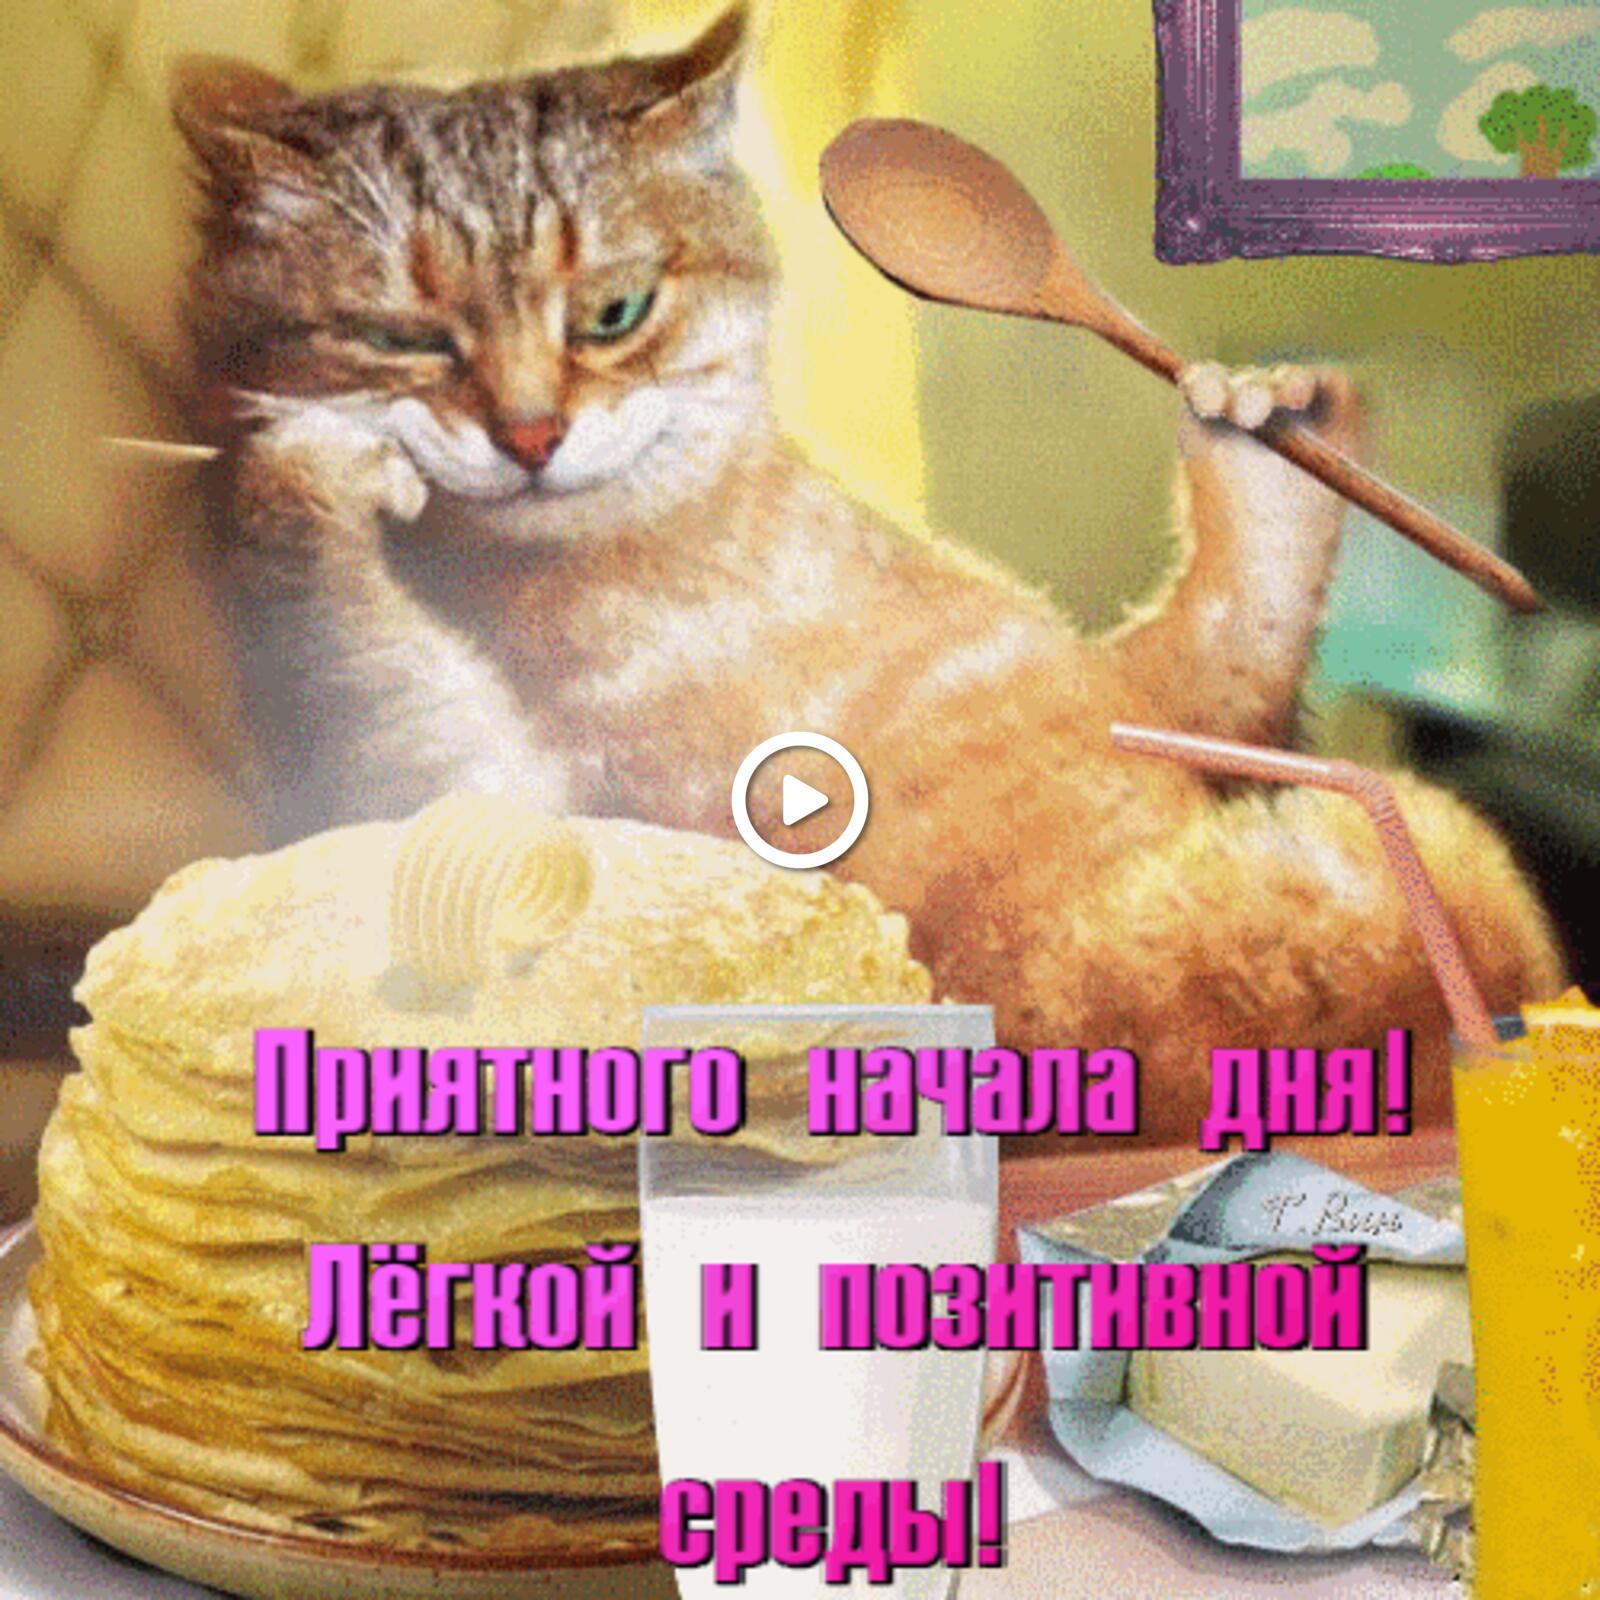 A postcard on the subject of good morning cat pancakes for free